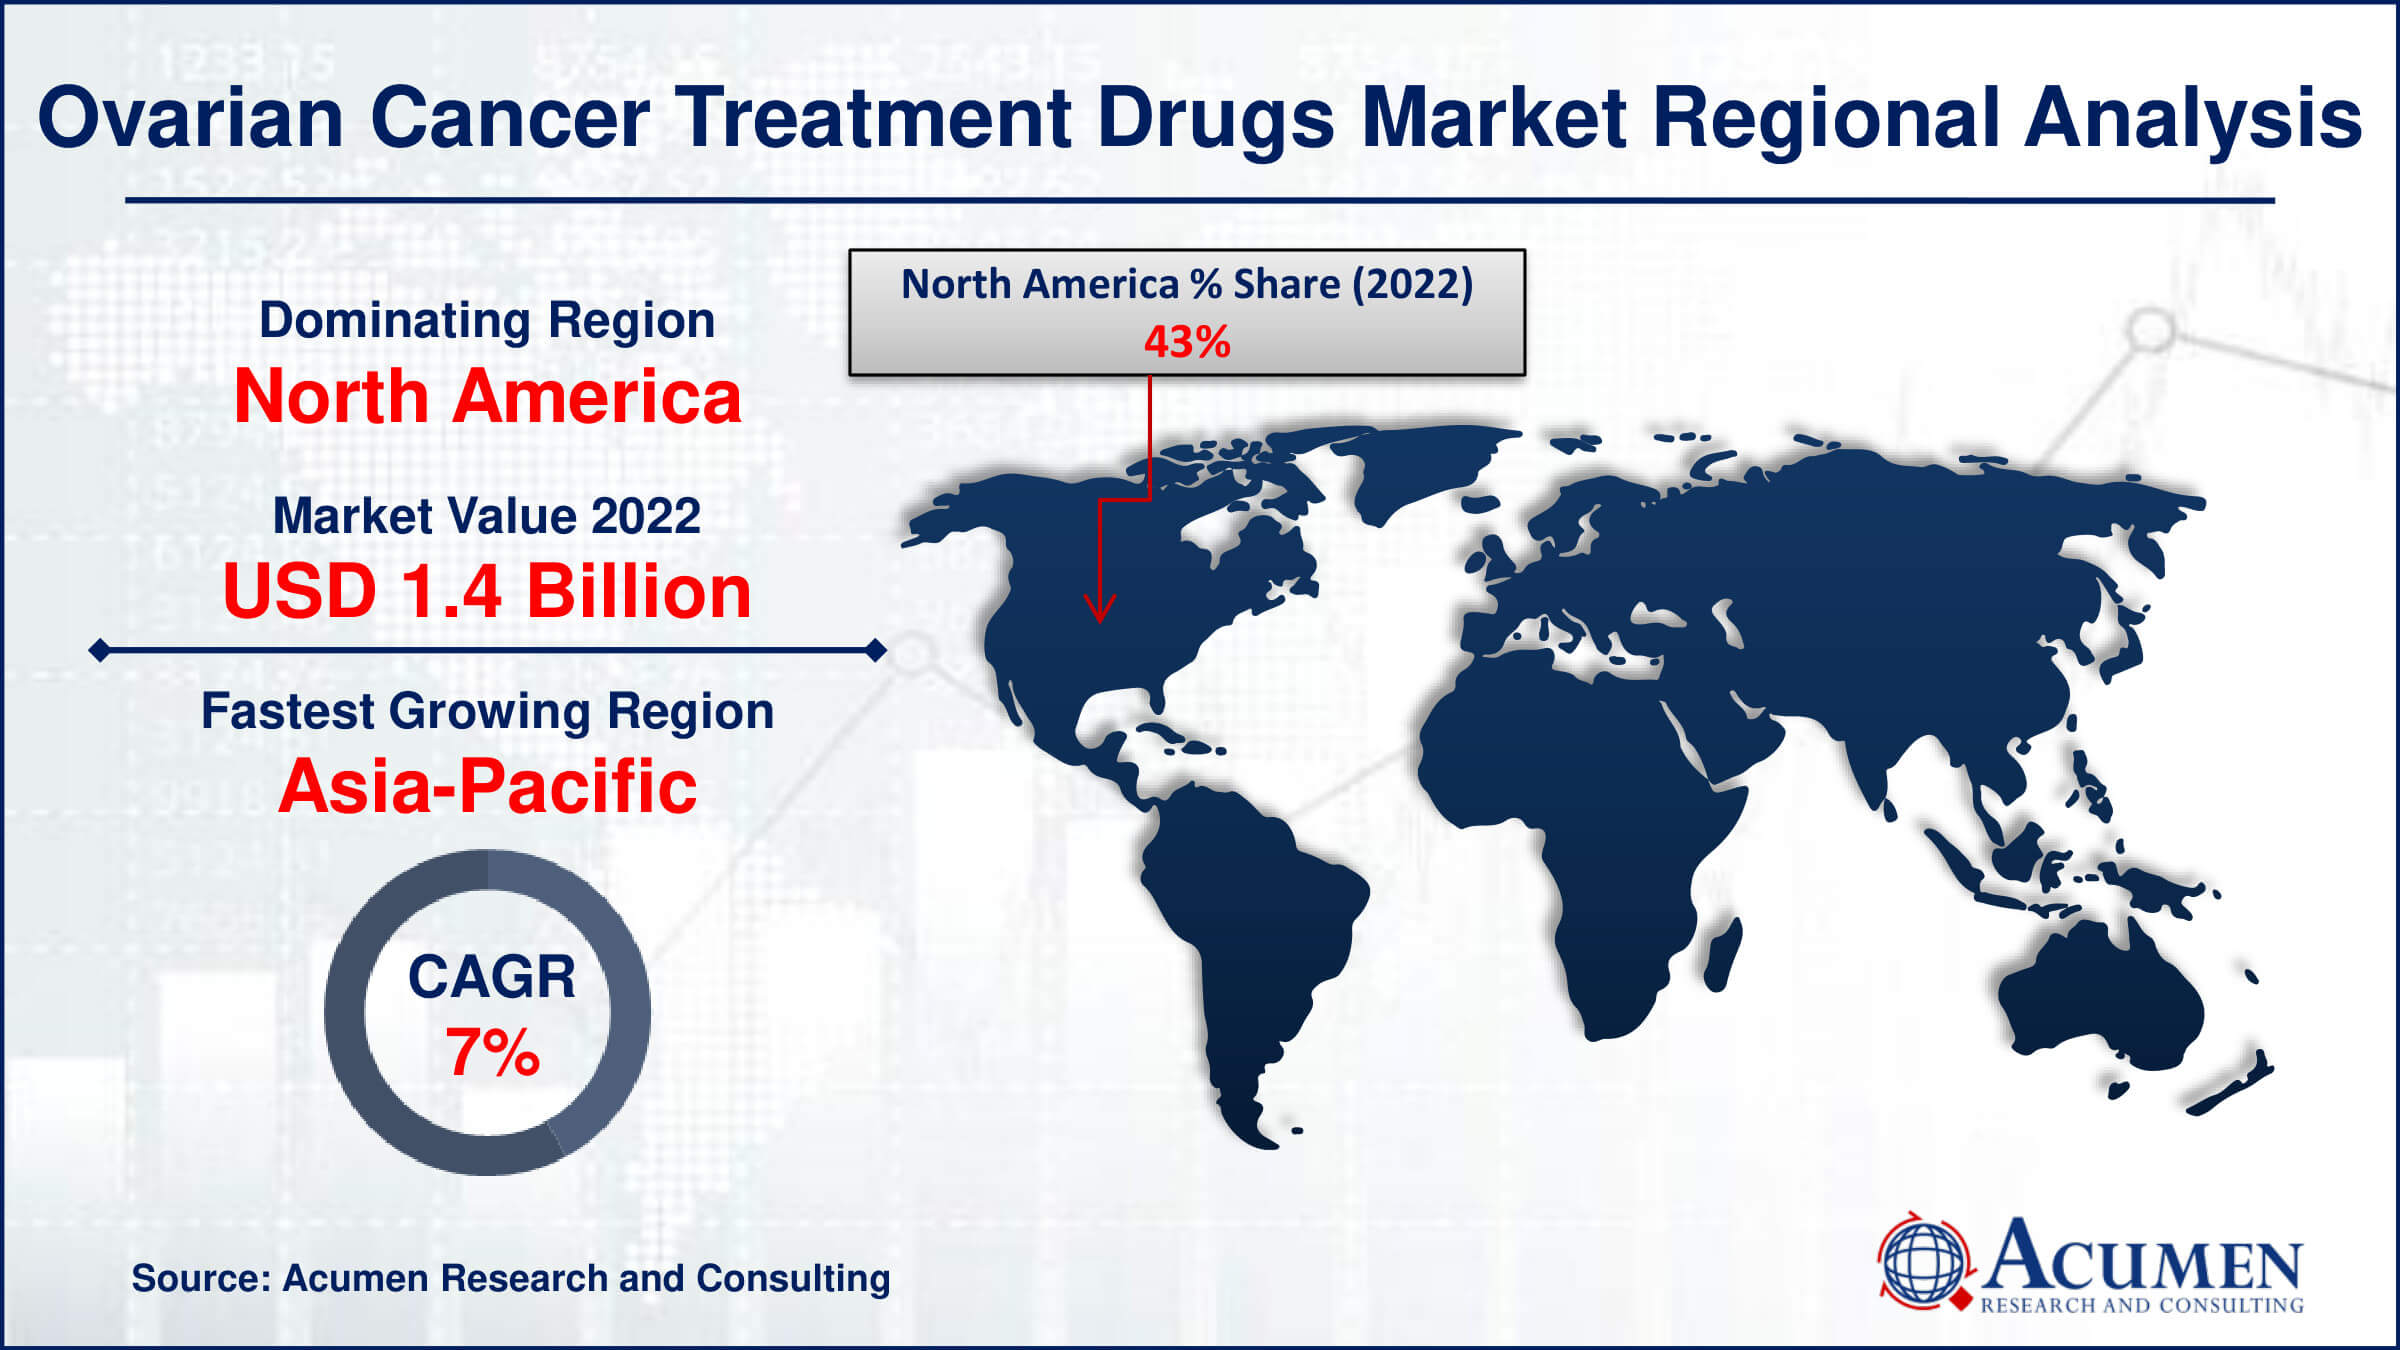 Ovarian Cancer Treatment Drugs Market Drivers